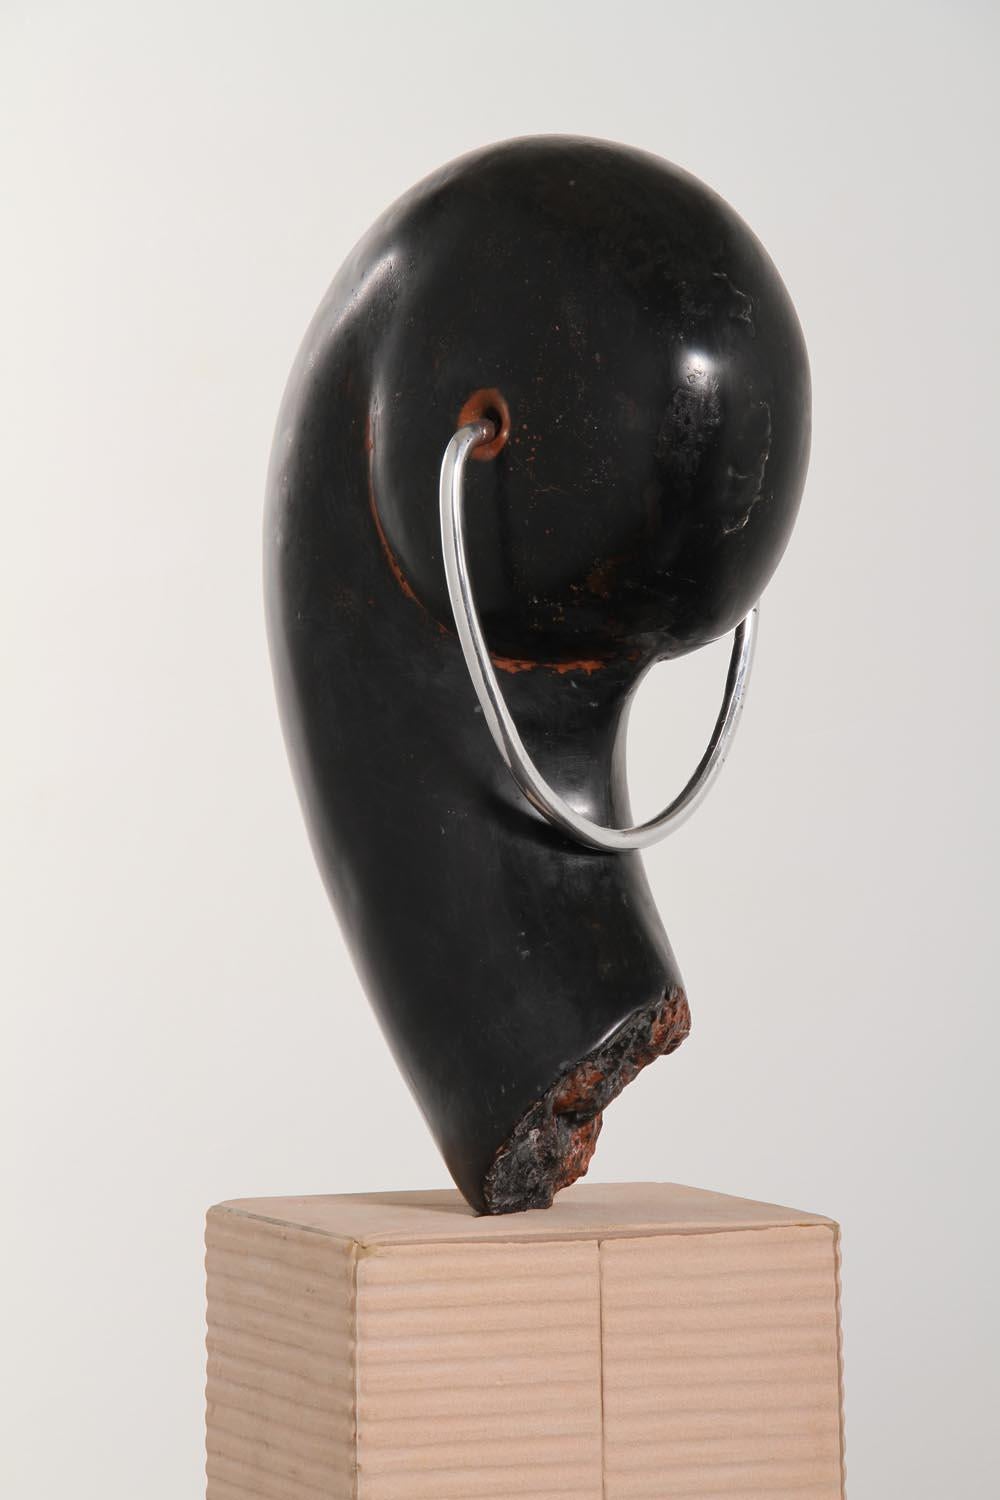 KING OF THINGS -This is a delightful, happy, and playful piece. Henry Moore, Naguchi, Brancusi, and other sculptors over centuries have had a tendency to stack things.  This piece has a major air space under the piece in order to capture the treads